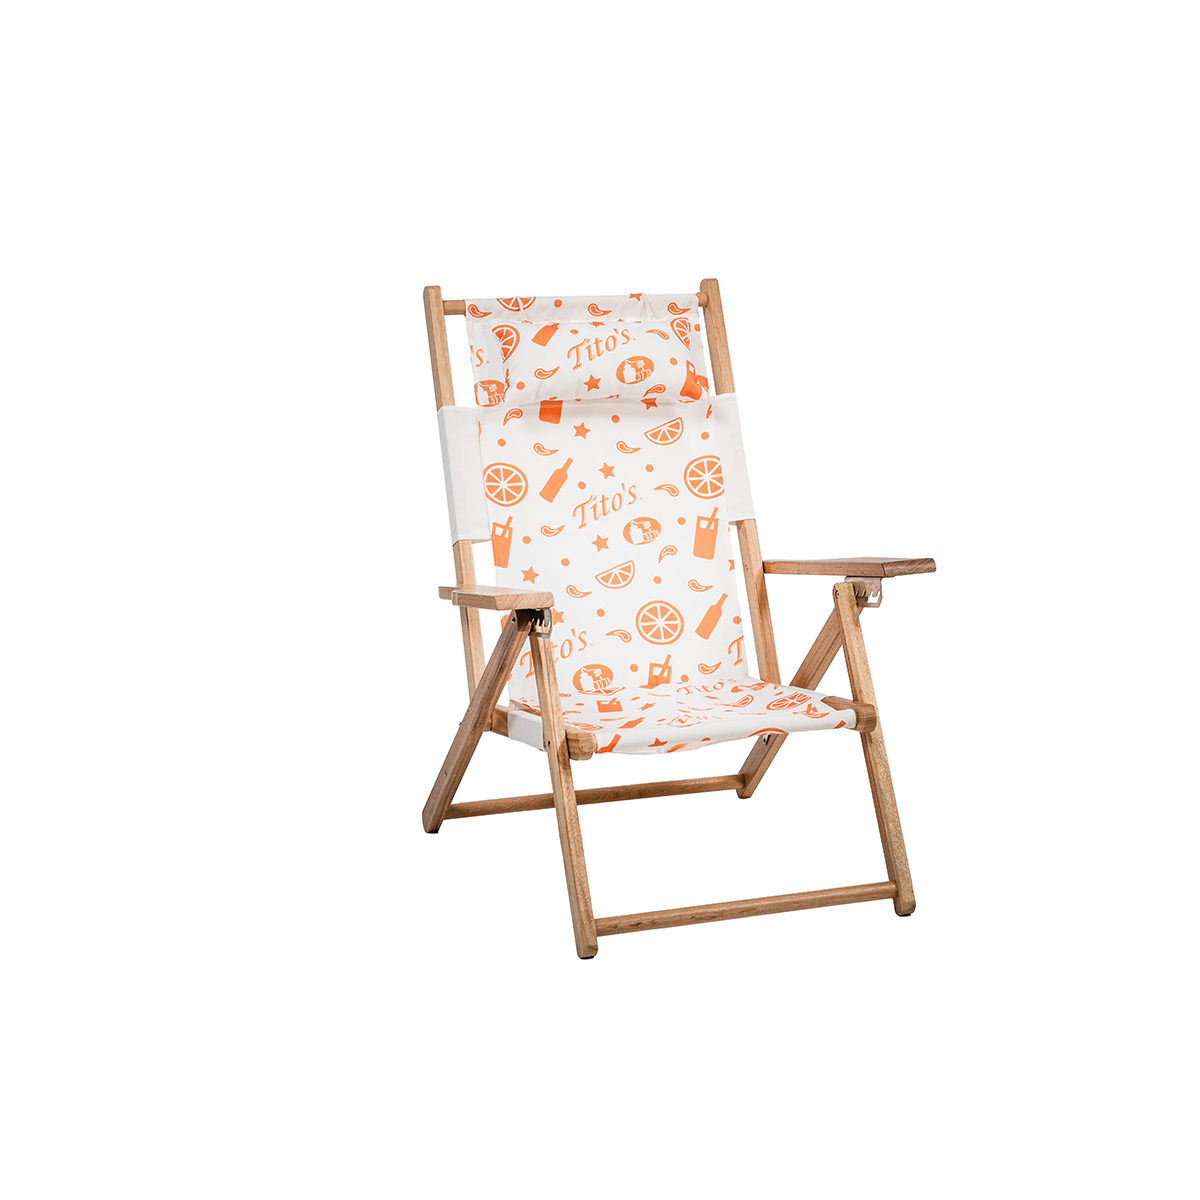 Hardwood frame folding chair with white canvas seat and orange Tito's Handmade Vodka wordmarks and cocktail designs